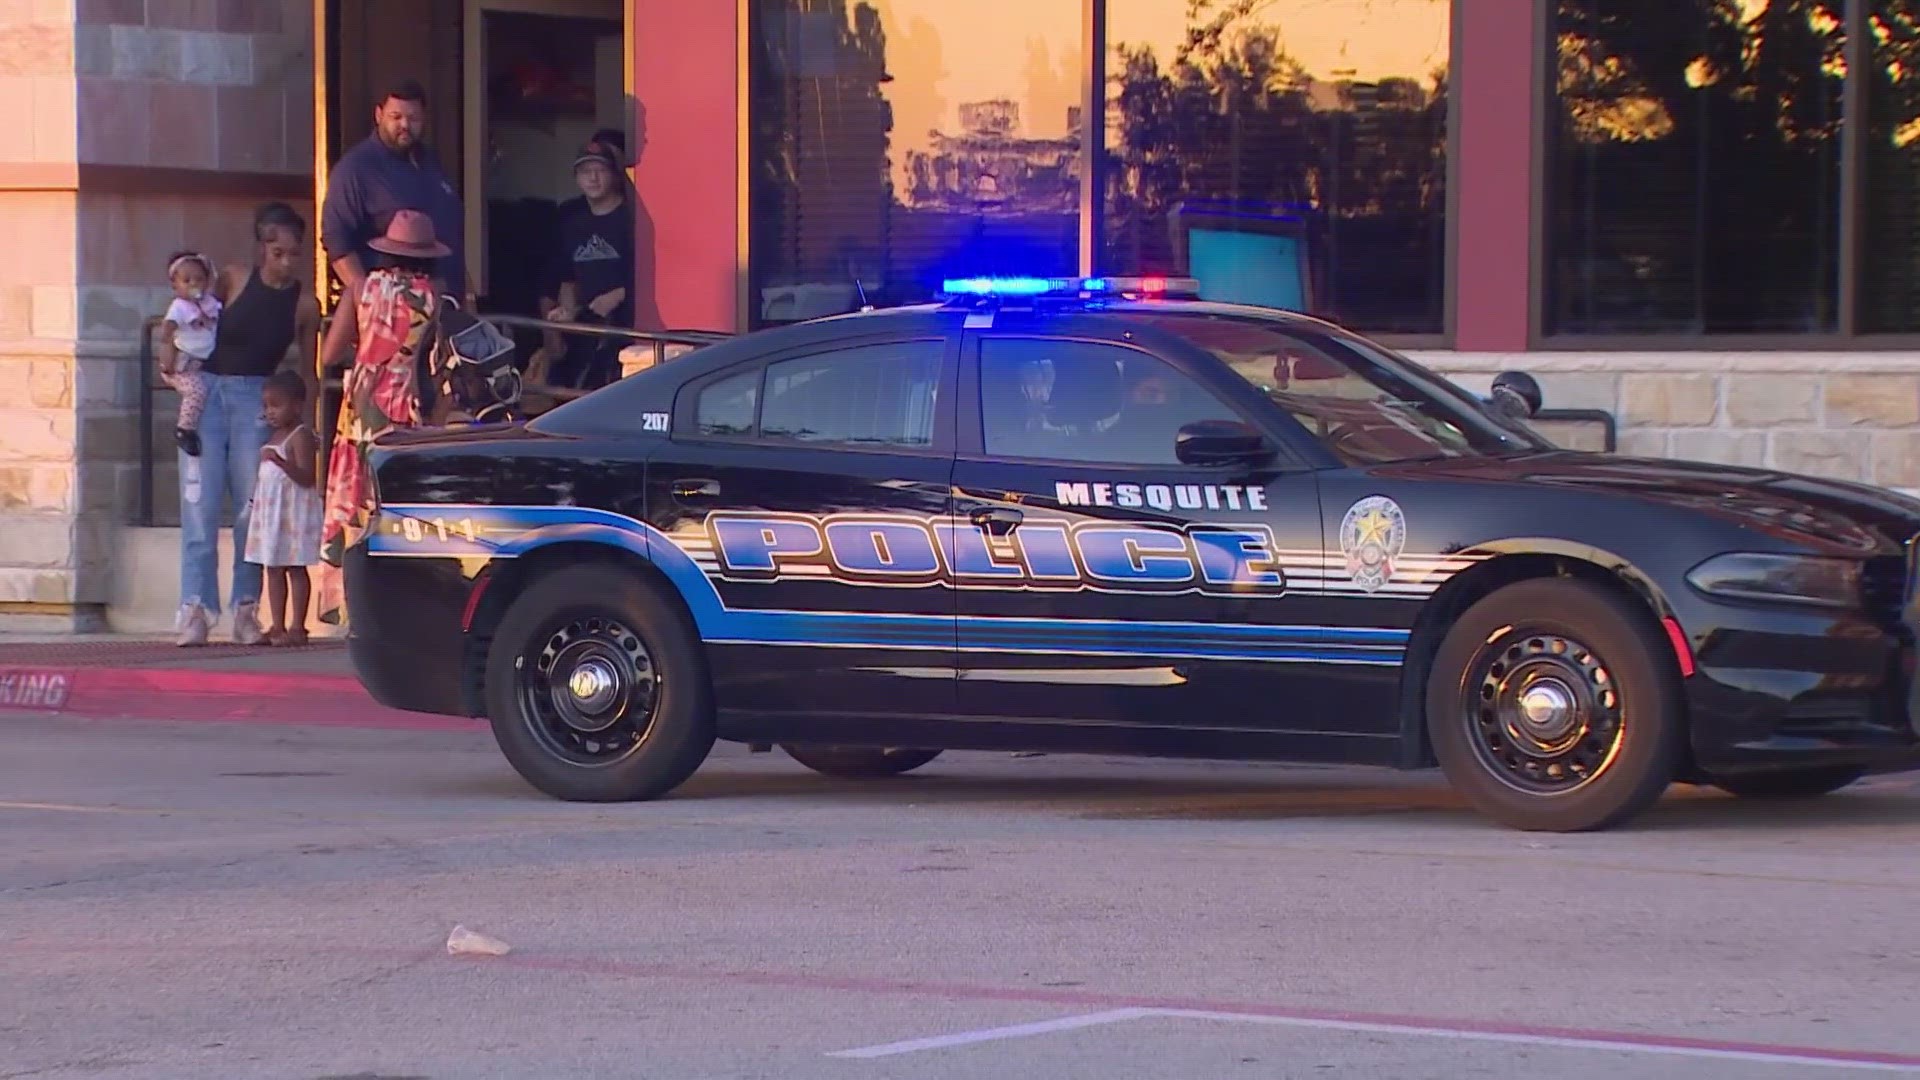 Suspect Arrested After Reported Shooting At Mesquite Mall